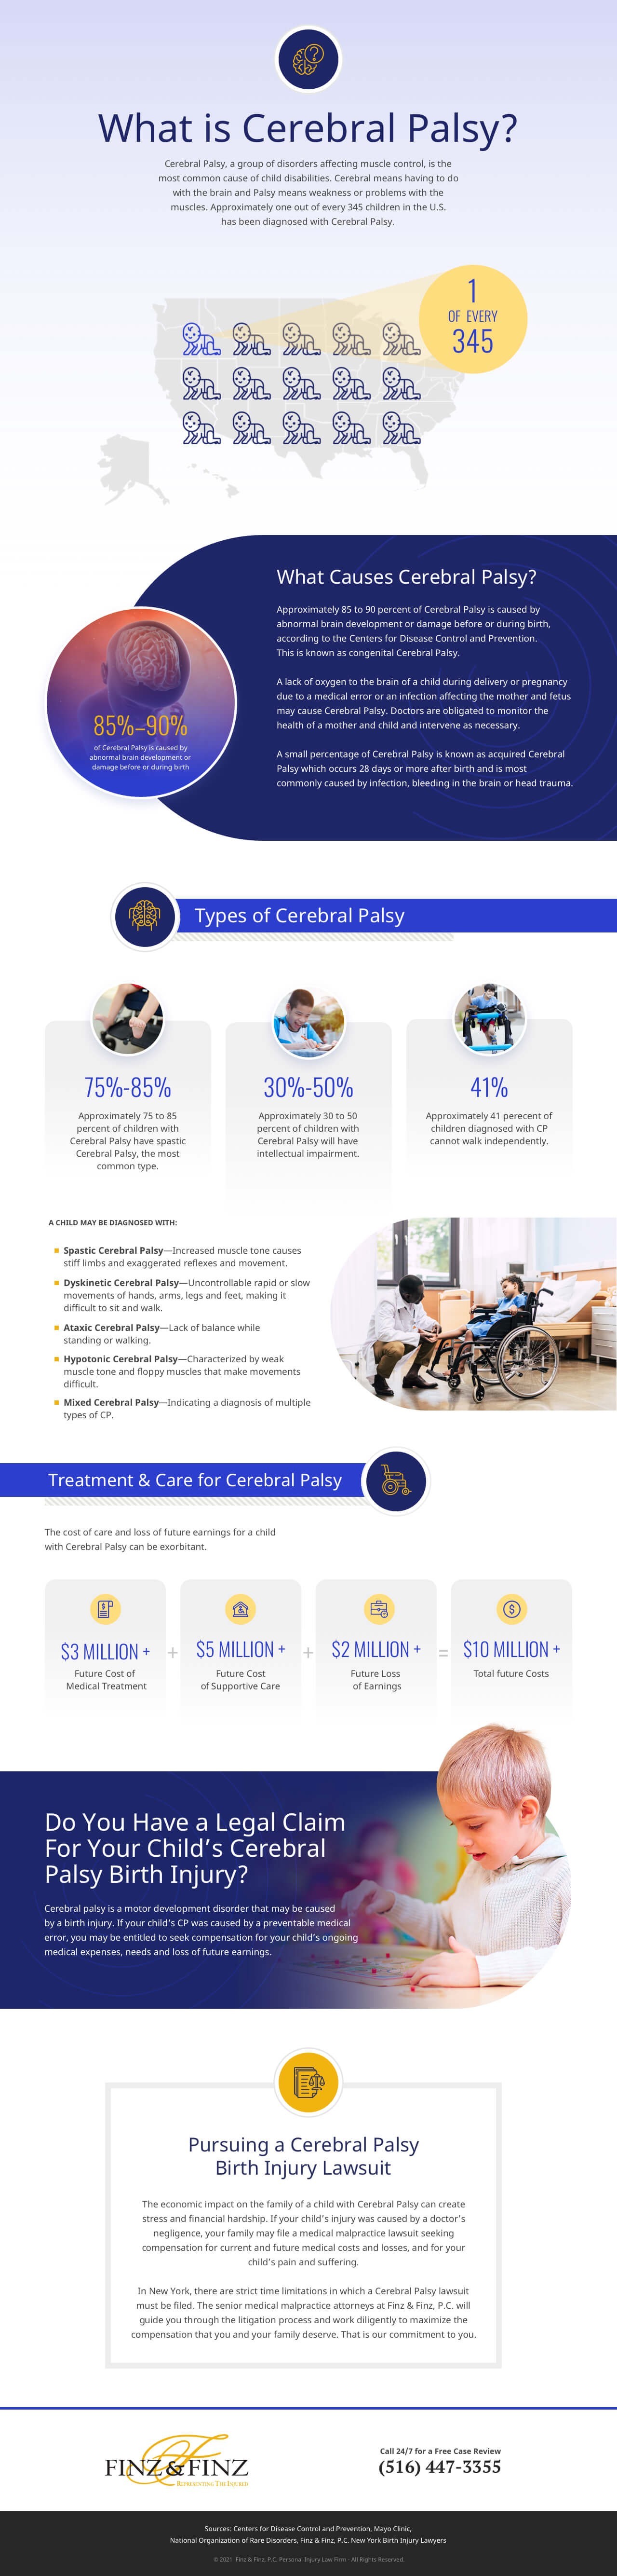 Cerebral Palsy Birth Injury Facts and Figures